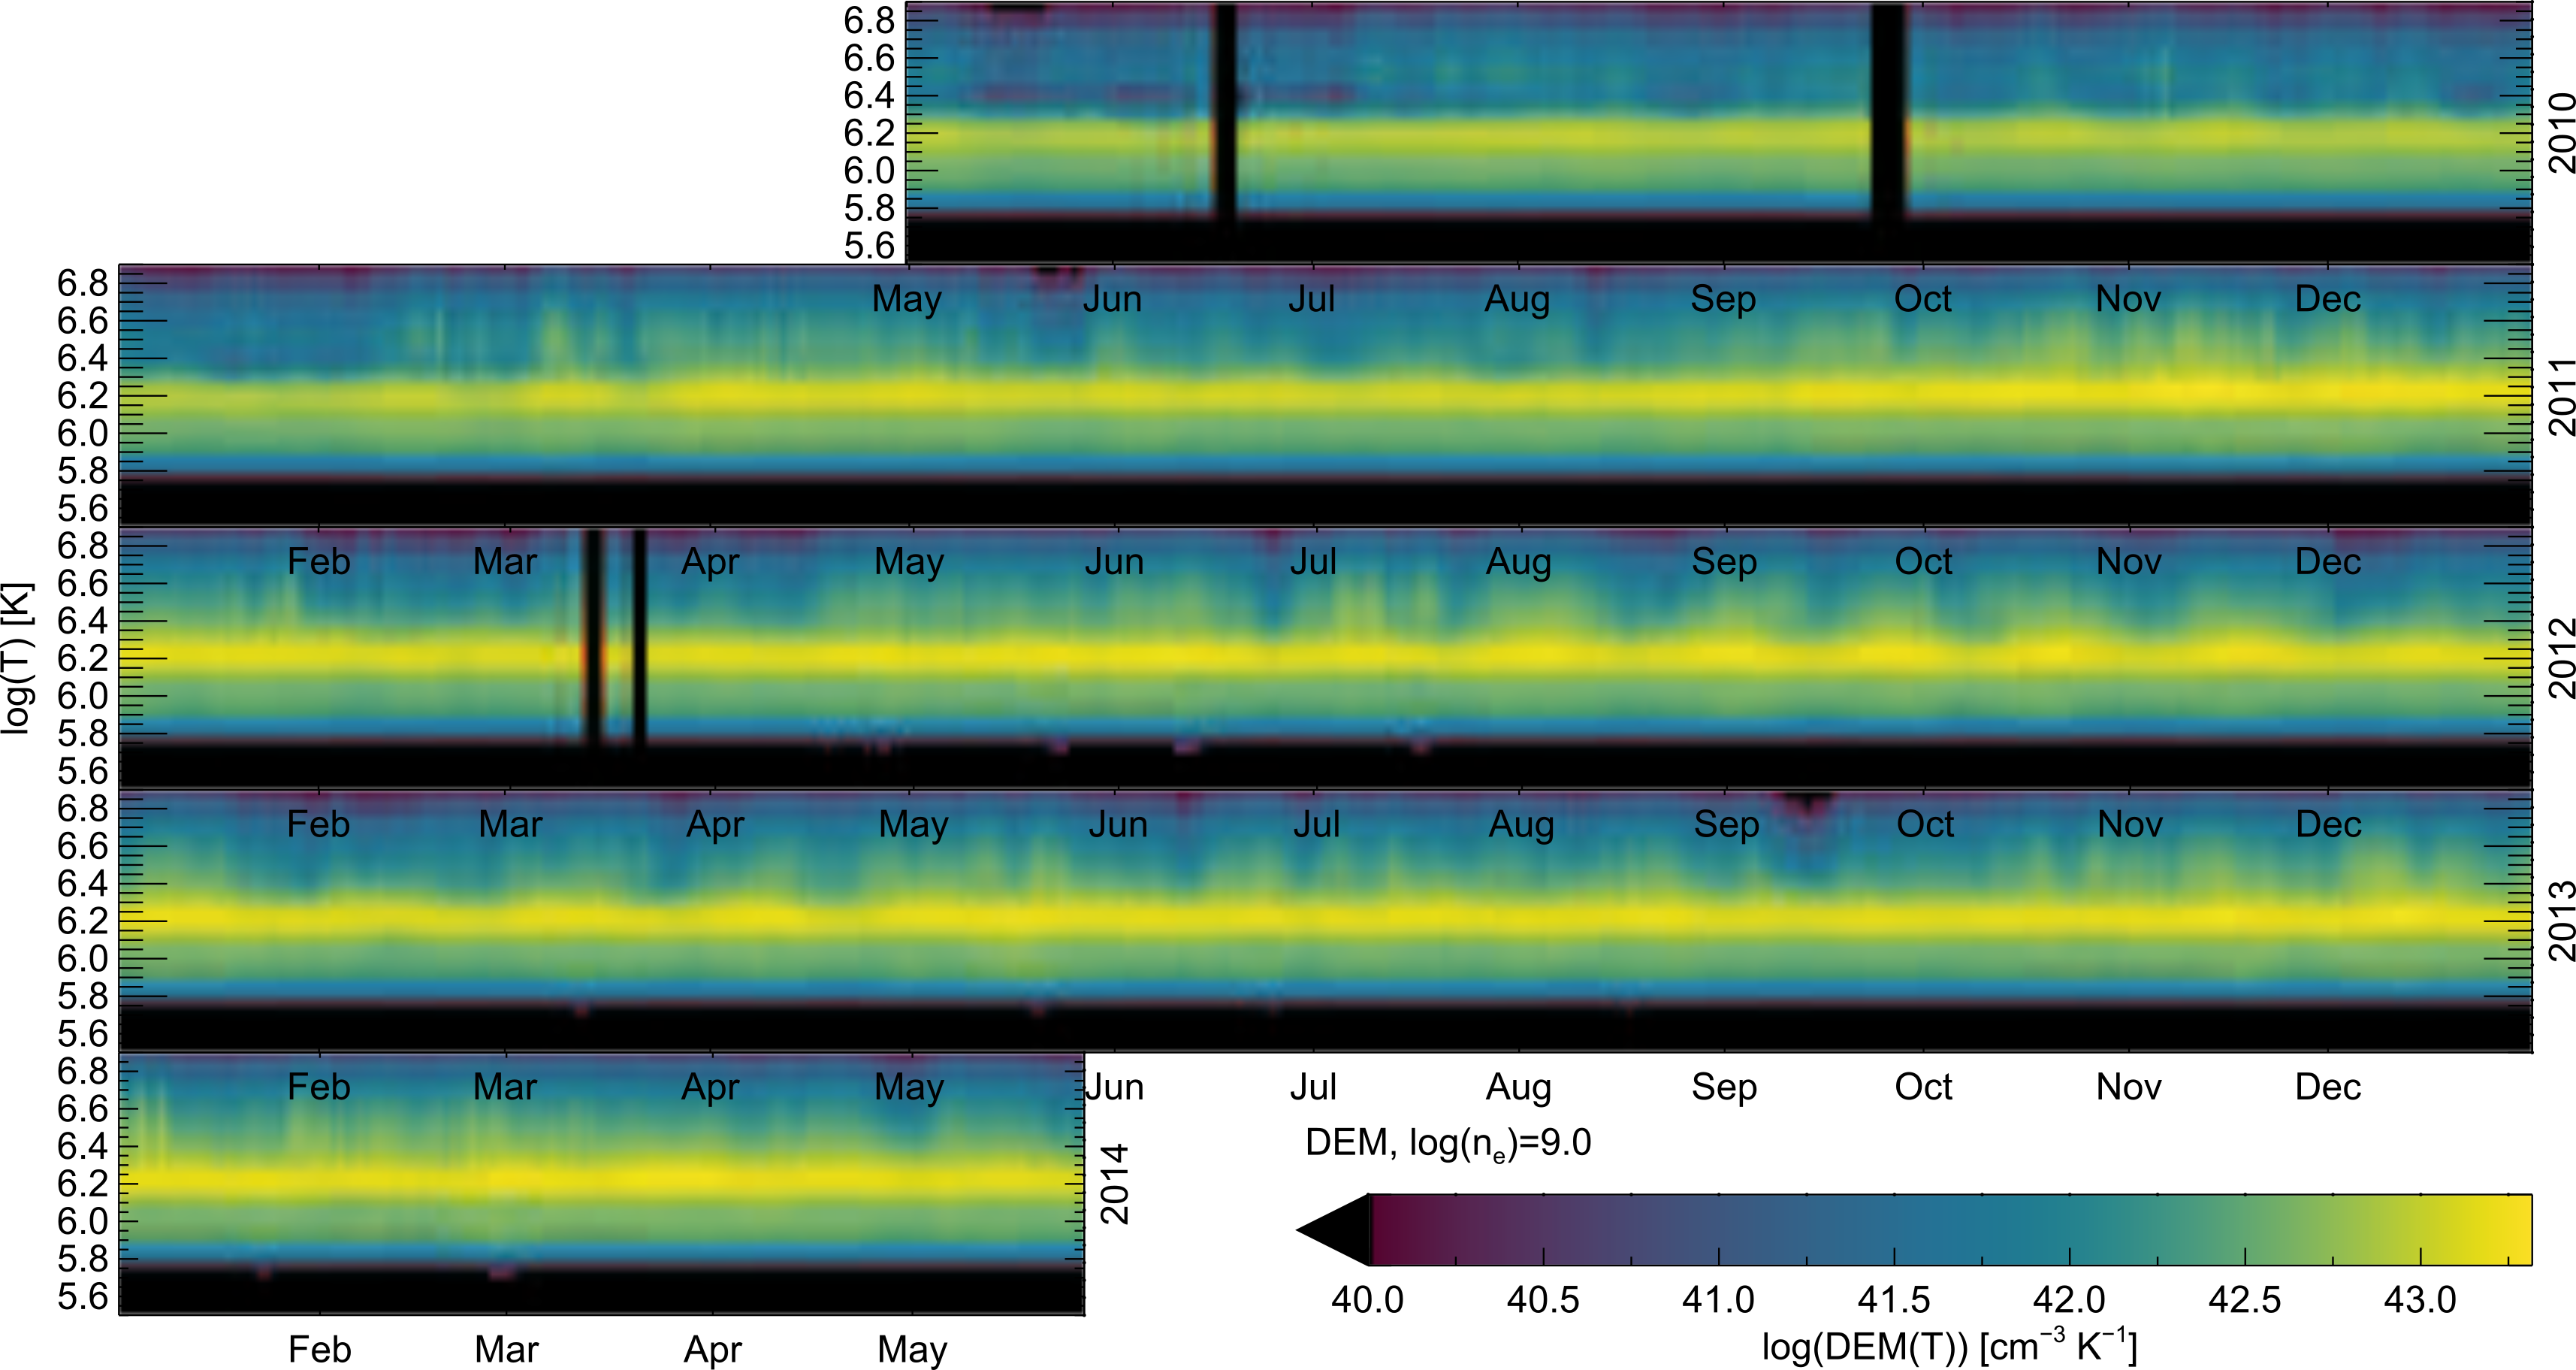 Time series of DEM solutions generated from EVE MEGS-A spectra